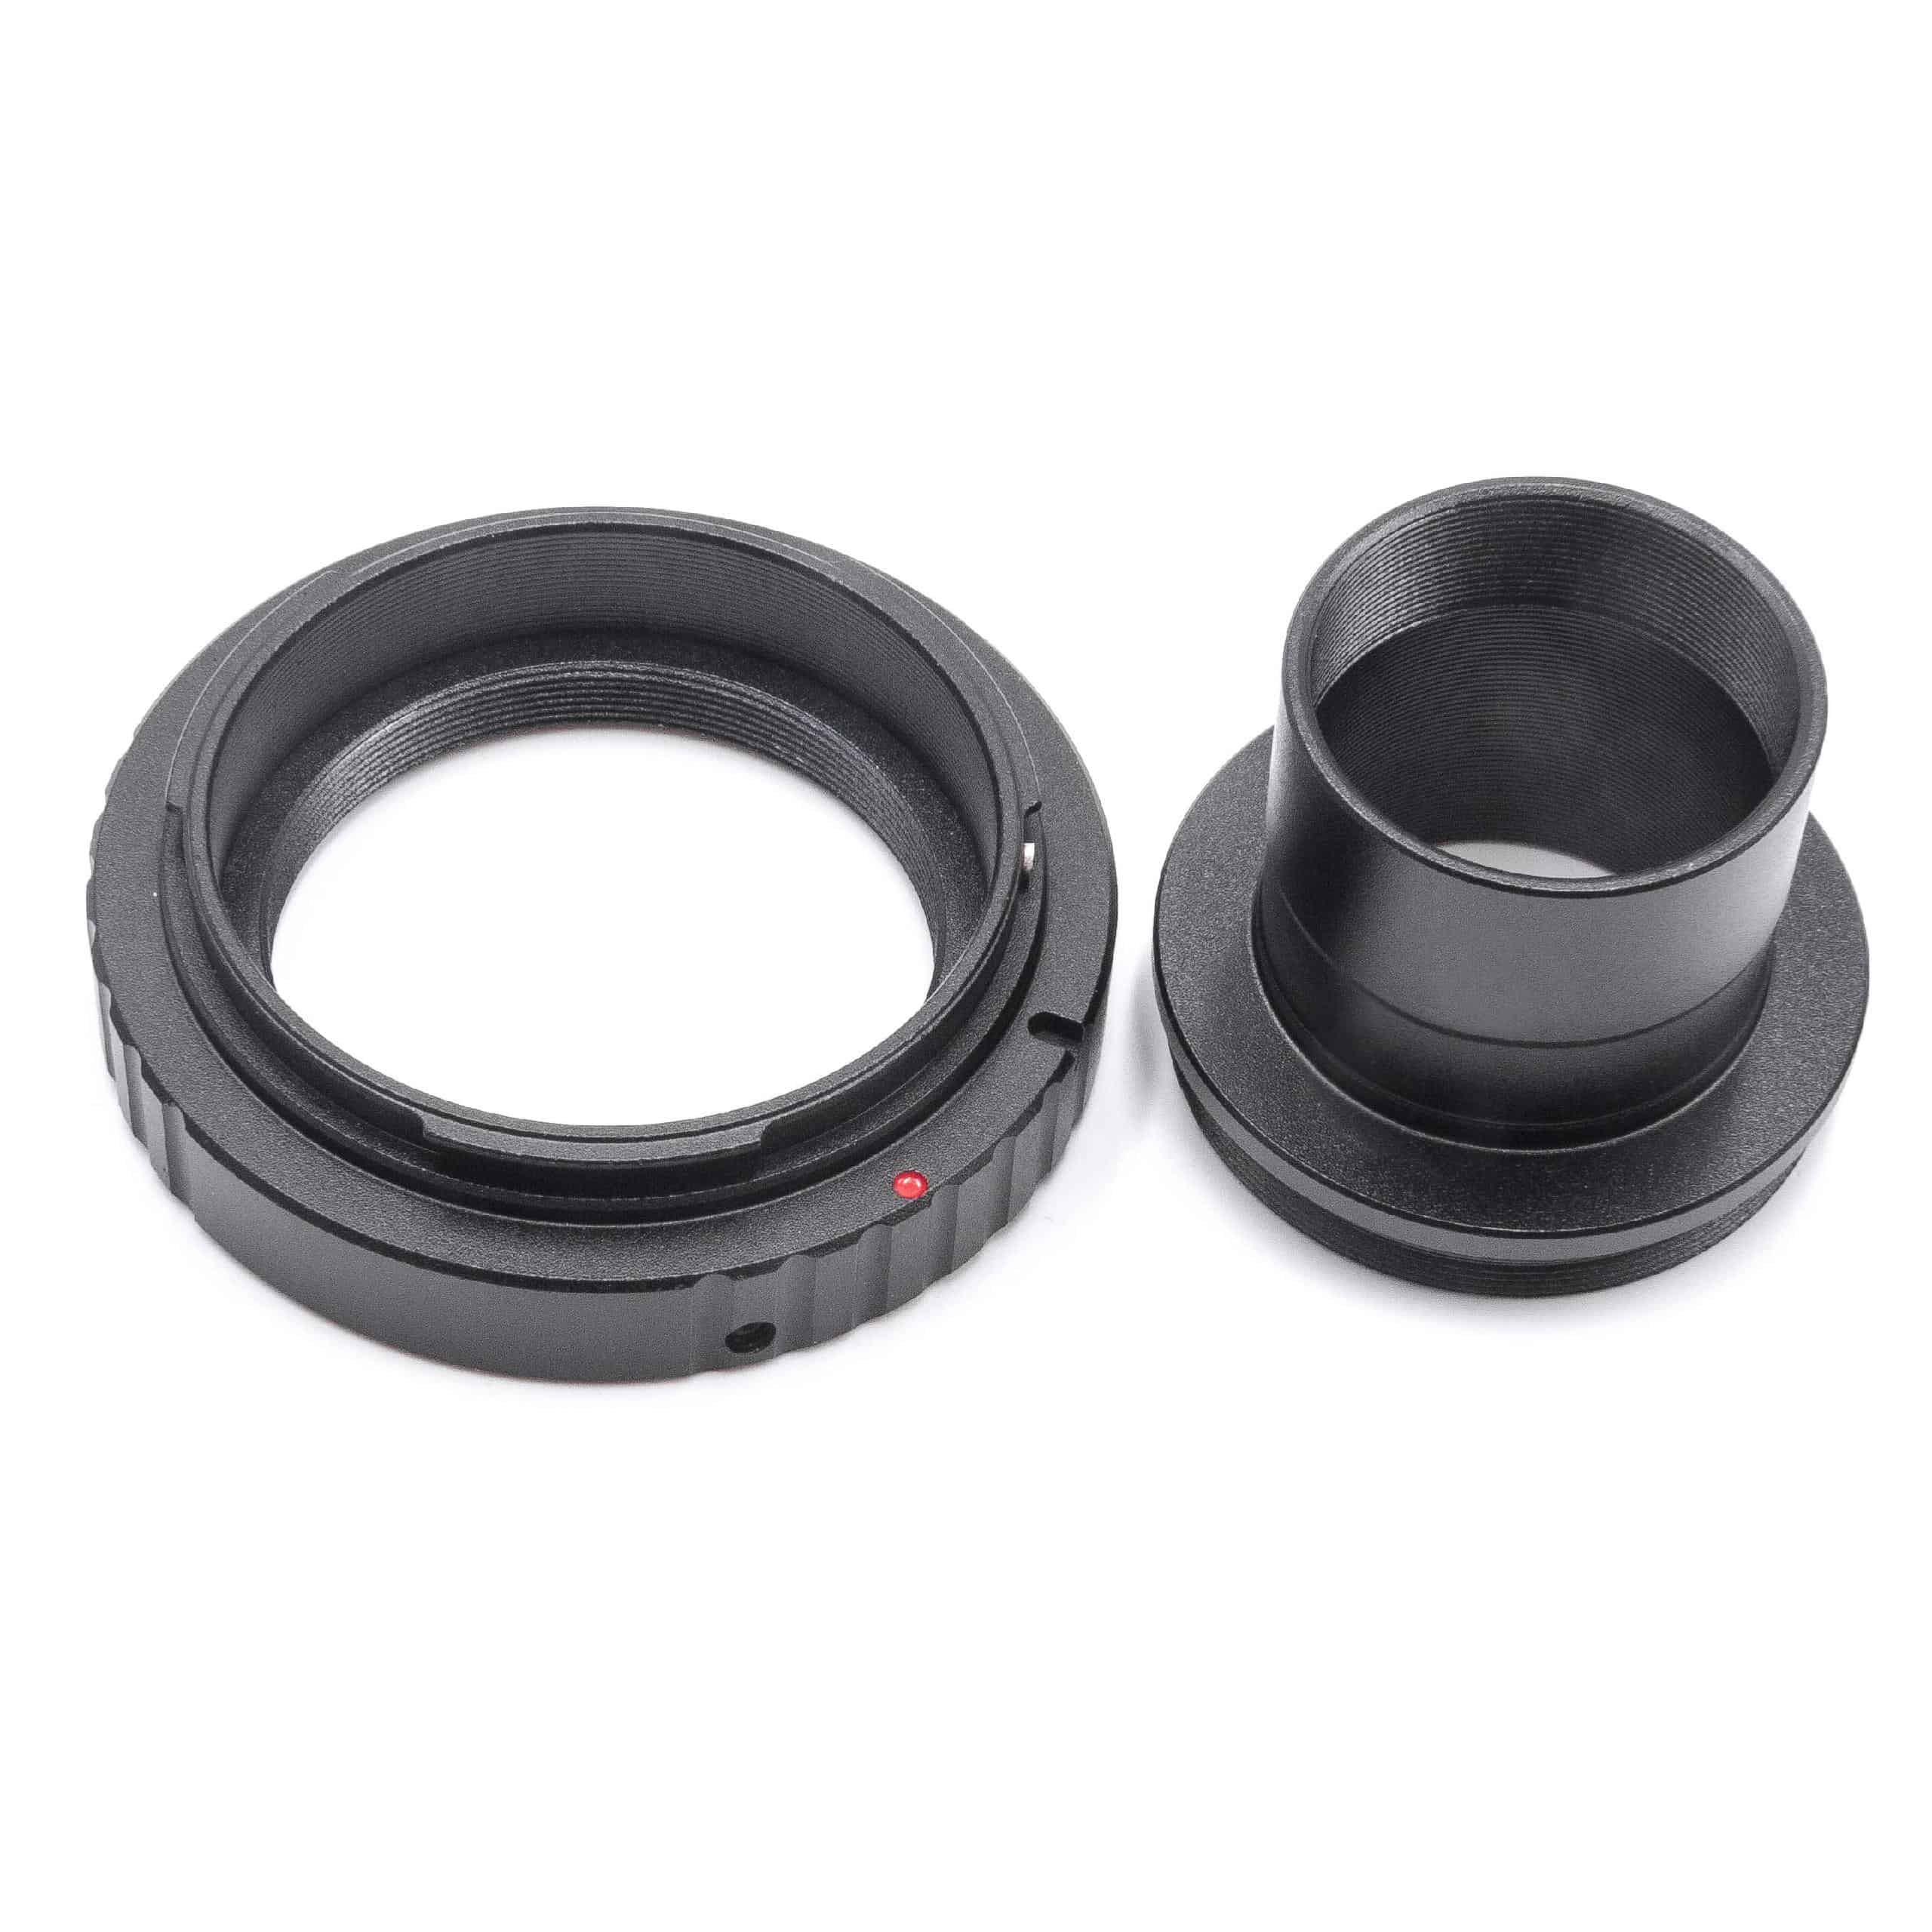 2x Adapter ring, T2-ring adapter, lens mount adapter 1,25" - M42x0.75 suitable for Canon EOS telescope, camera